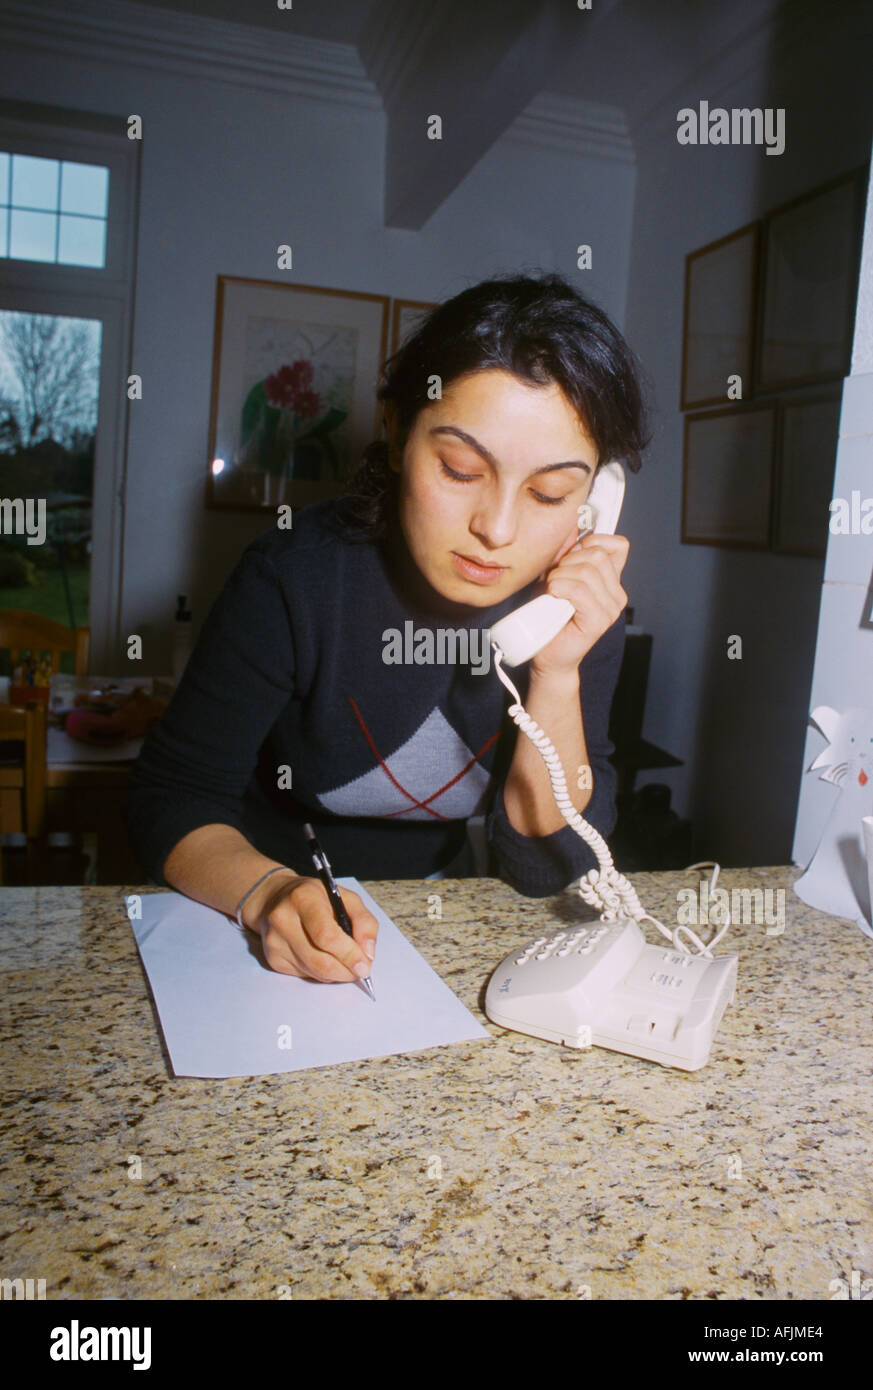 Young Woman Answering Phone At Home Taking Message Stock Photo